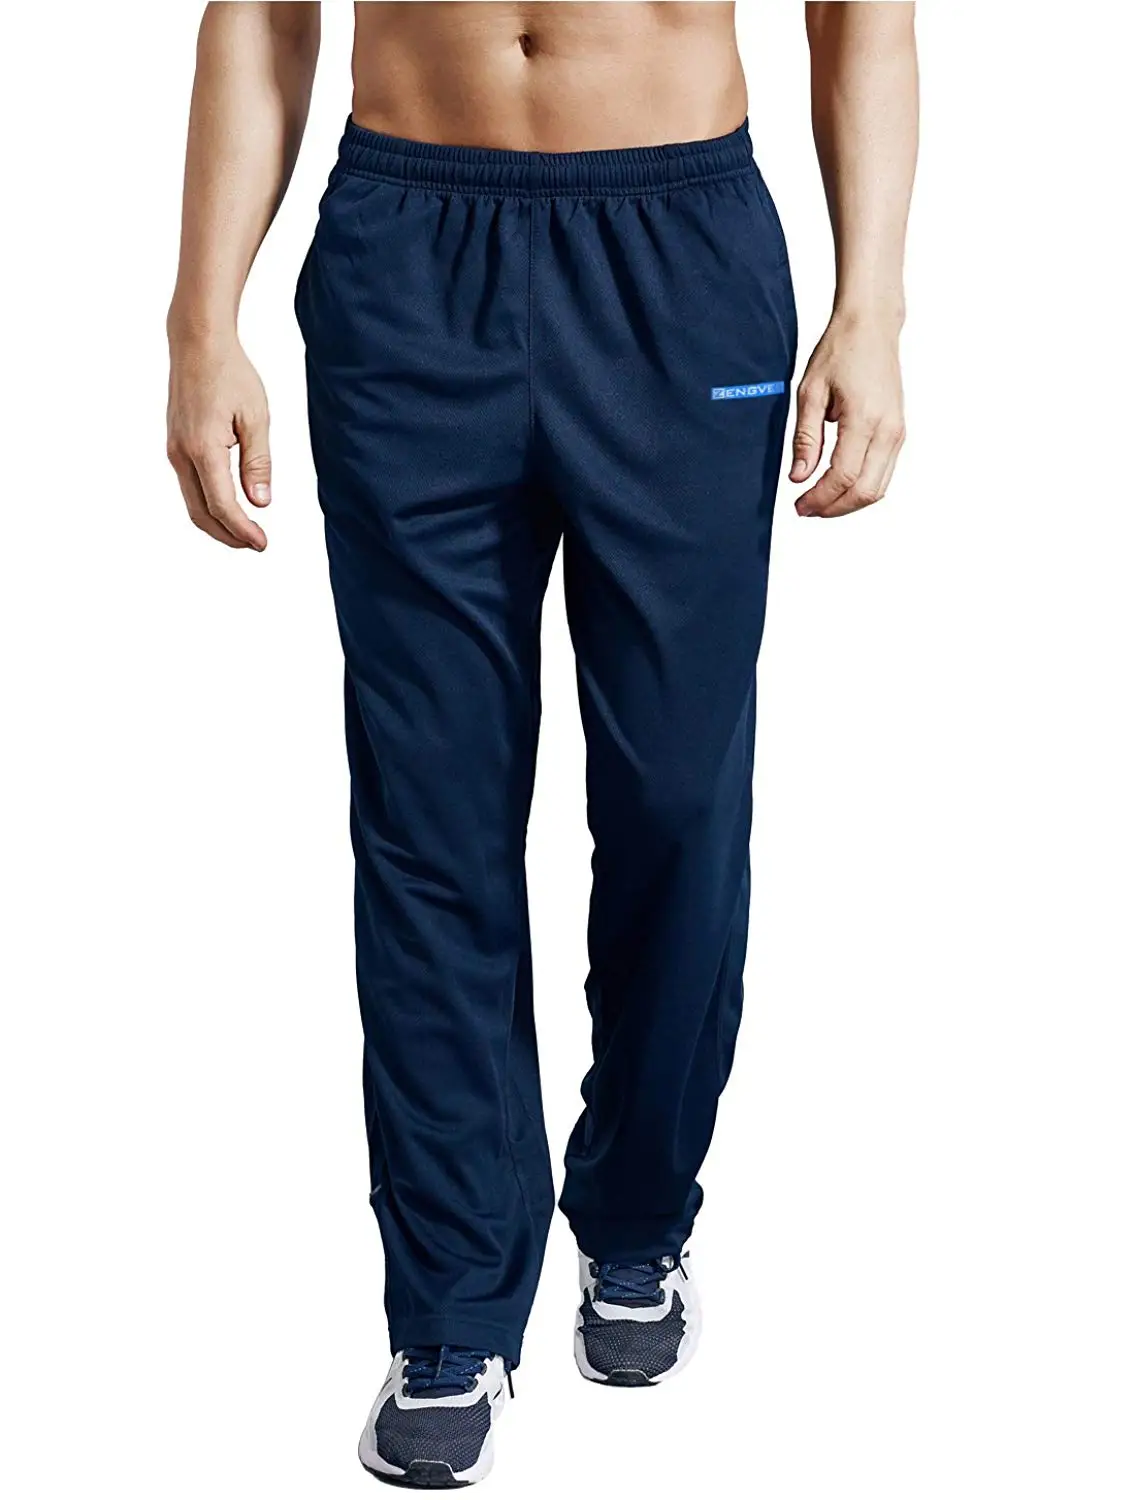 Buy Zengvee Mens Sweatpant with Pockets Open Bottom Athletic Pants for ...